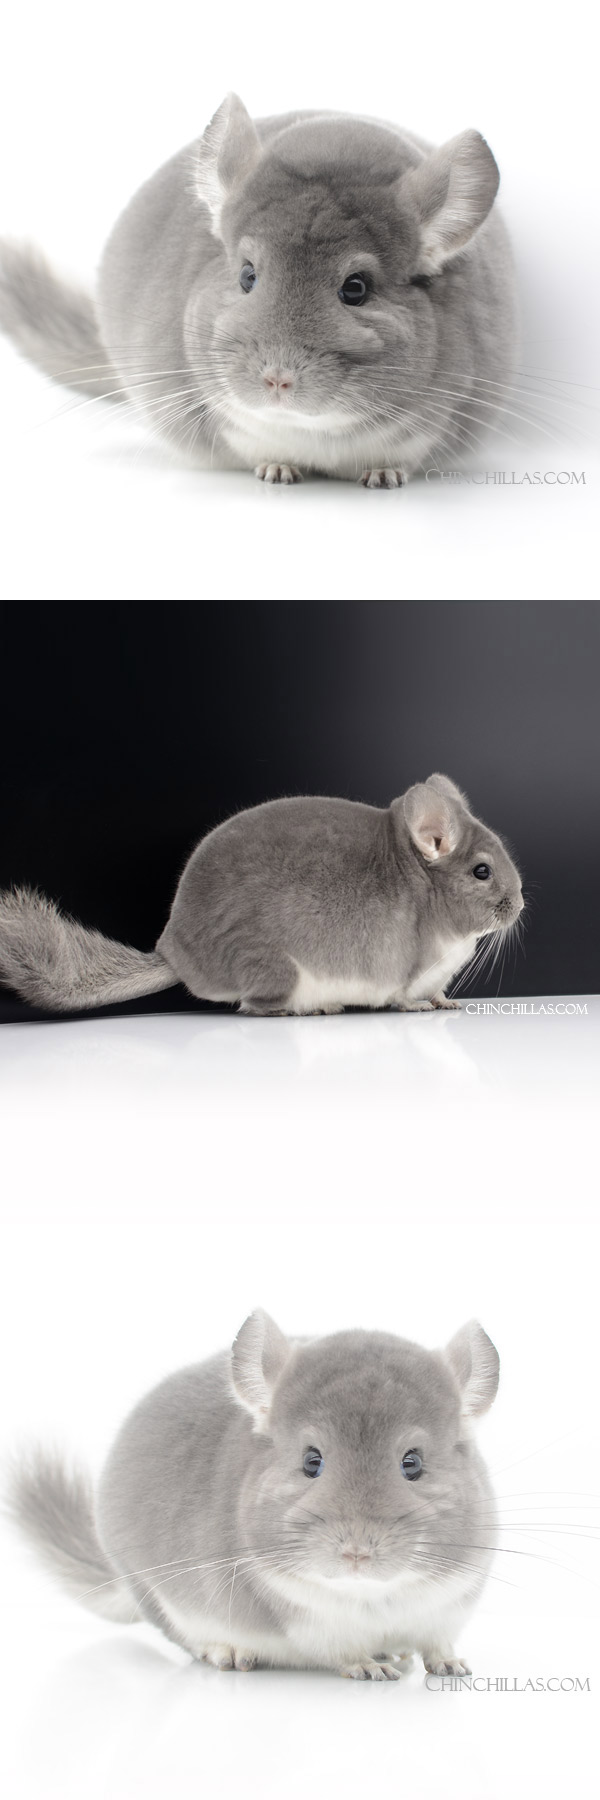 Chinchilla or related item offered for sale or export on Chinchillas.com - 23117 Extra Large Herd Improvement Quality Violet Male Chinchilla